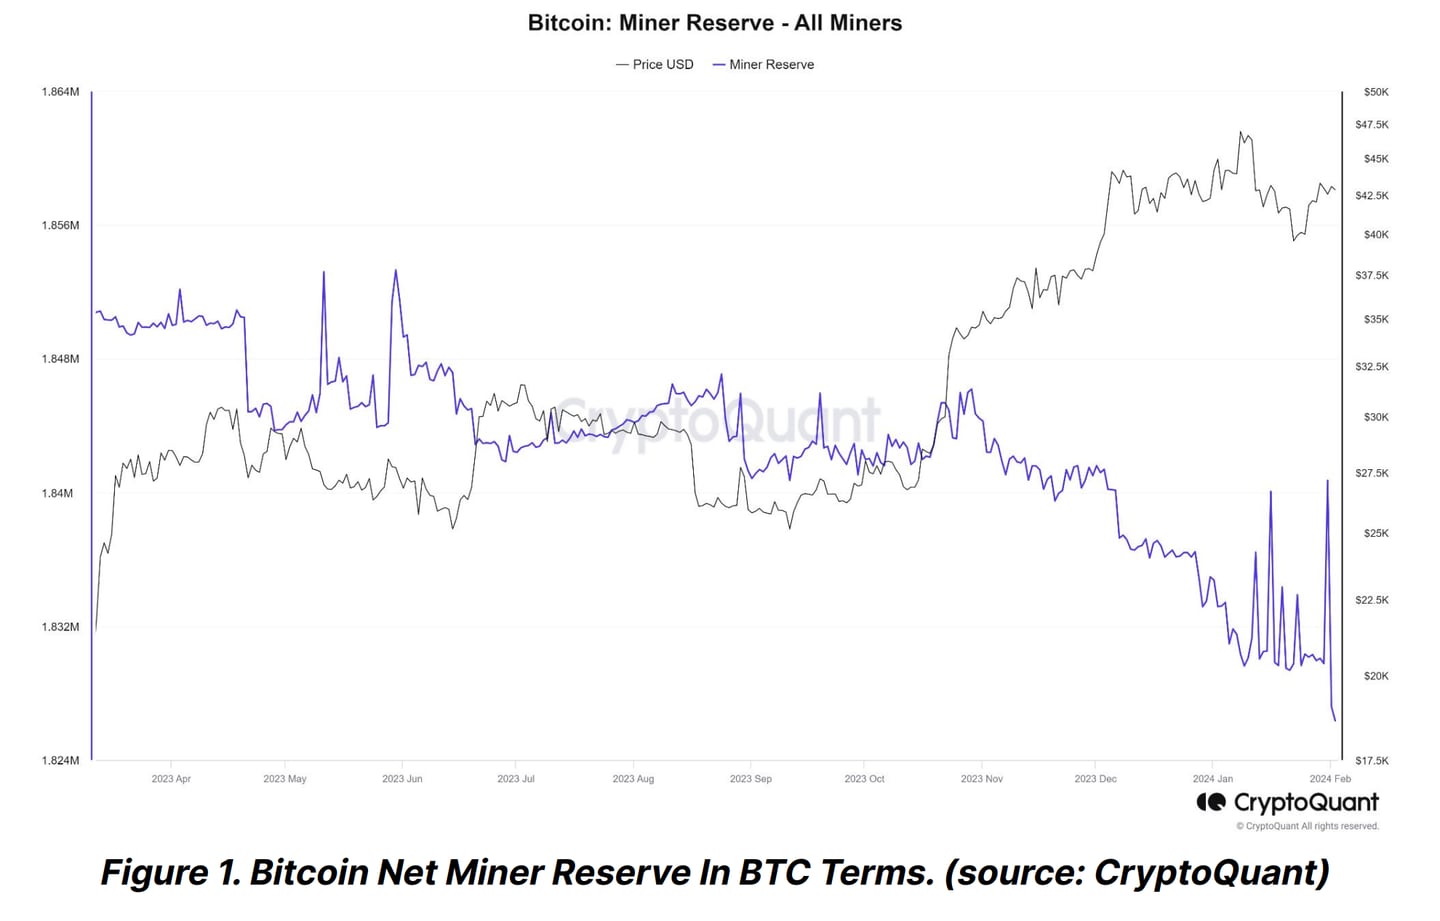 Bitcoin Netminer Reserve in BTC Conversion (Source CryptoQuant)